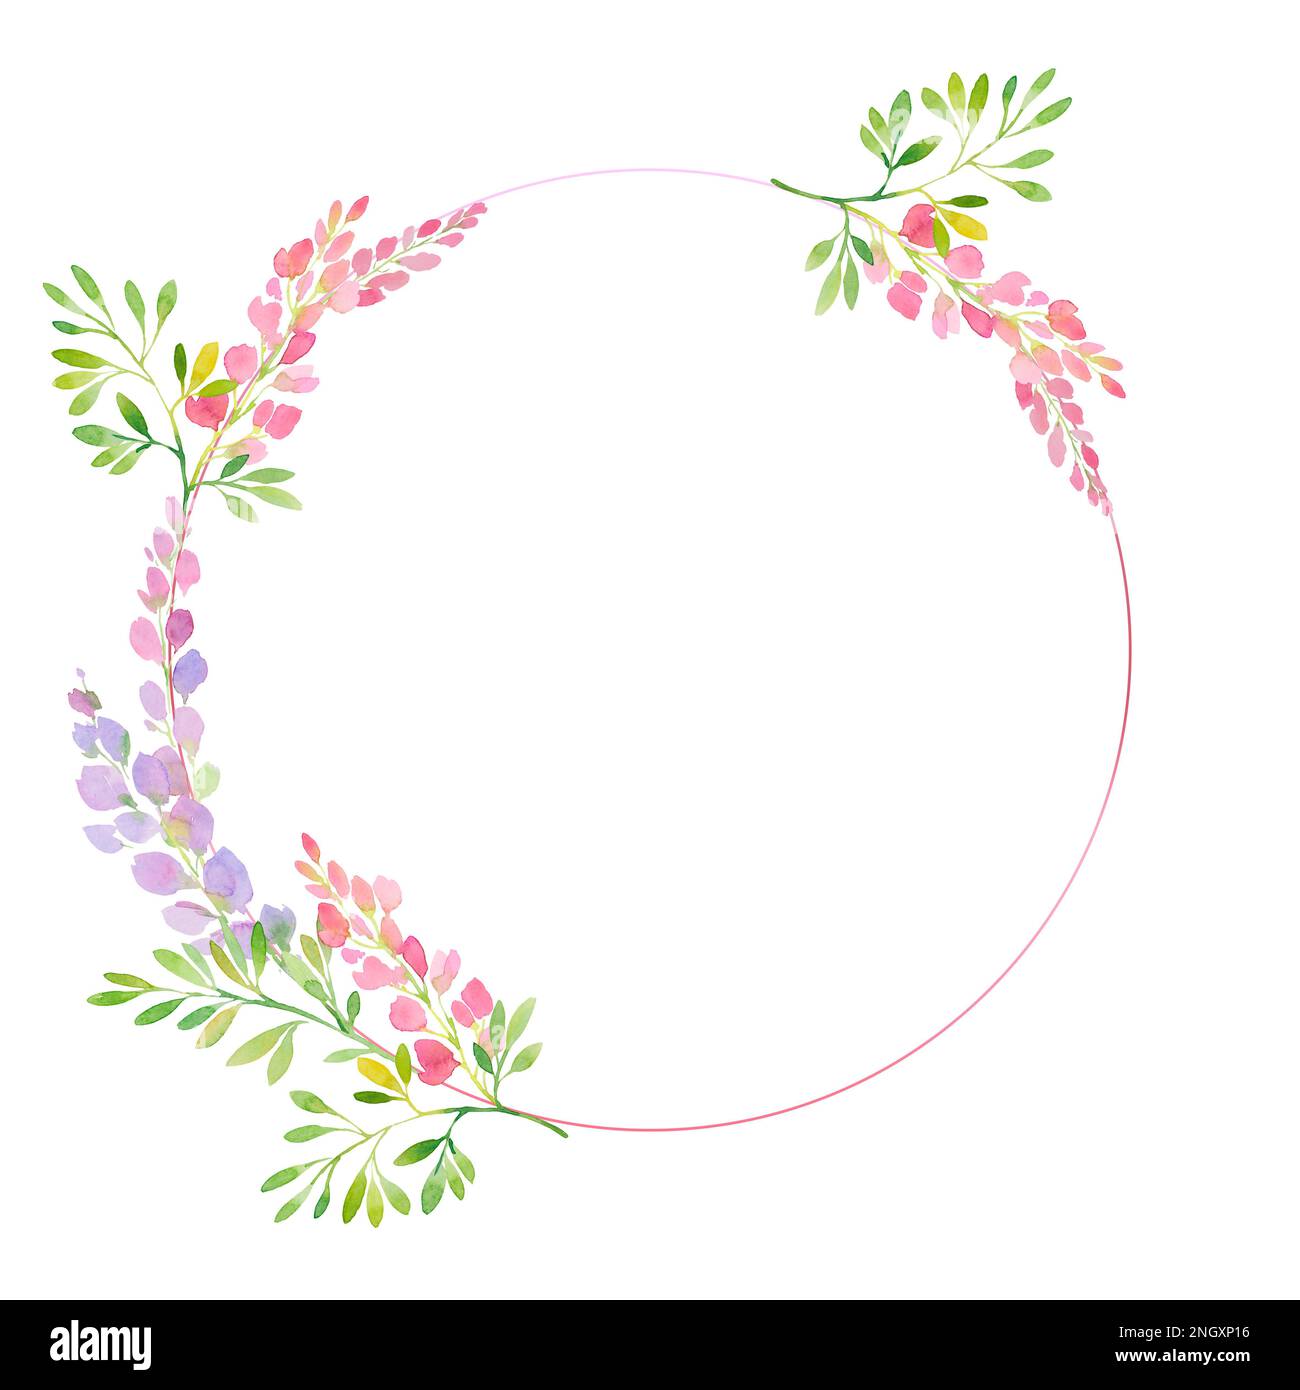 pink and purple wisteria frame,  branches and flowers, watercolor illustration. Stock Photo